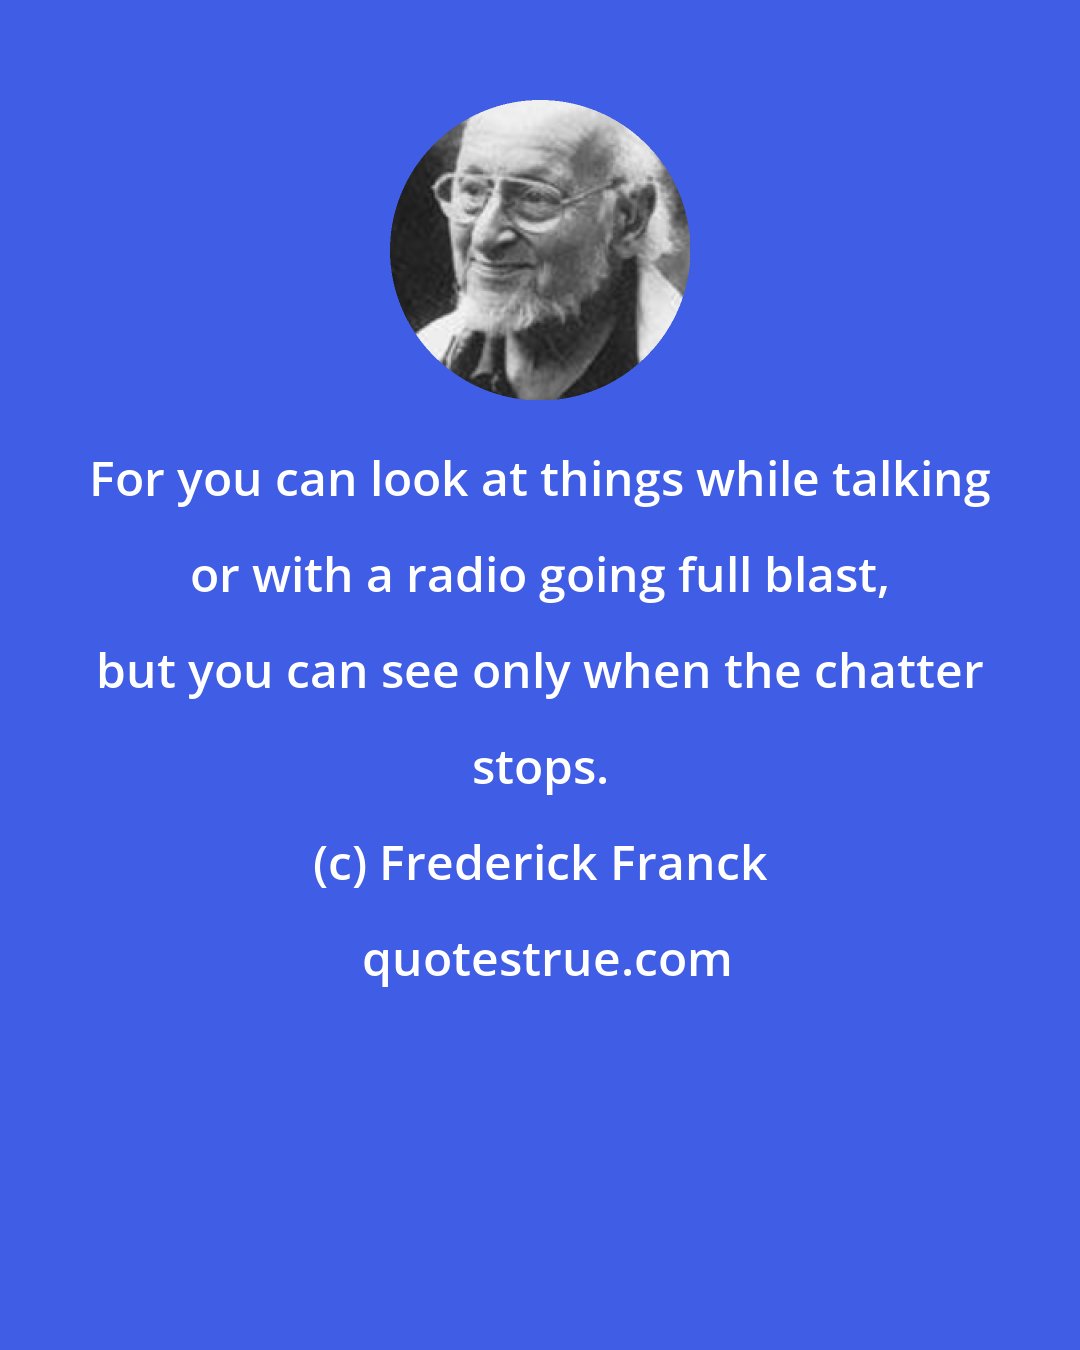 Frederick Franck: For you can look at things while talking or with a radio going full blast, but you can see only when the chatter stops.